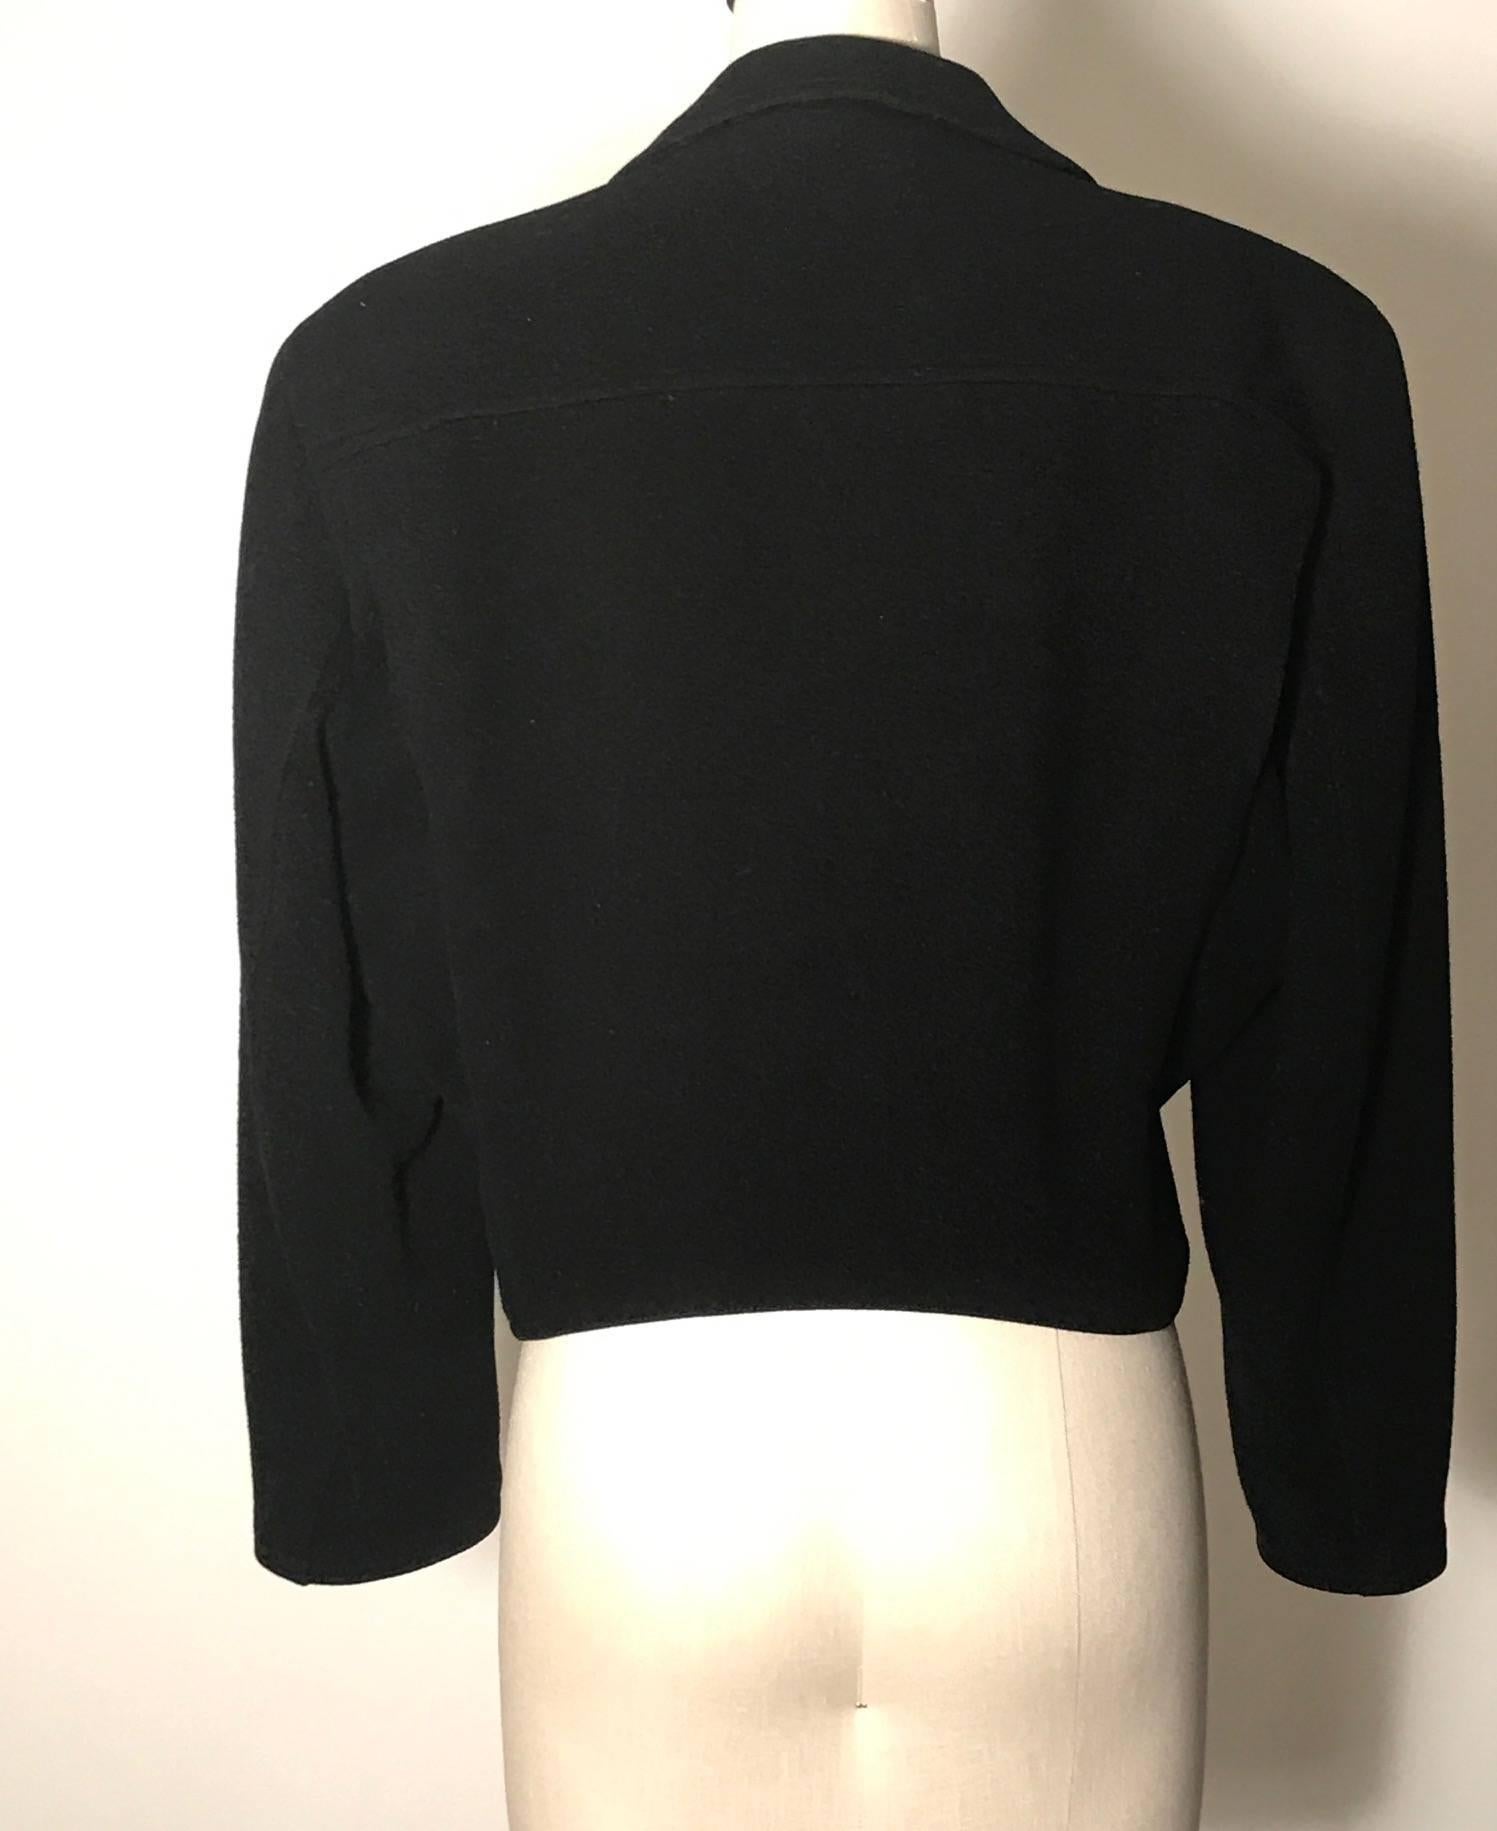 Vintage 1980s black wool biker jacket from Stephen Sprouse's Sprouse line. Asymmetrical styling with three zipper pockets at front, one mini flap pocket, zip closure, and zipper detailing at cuffs. 

100% wool.
Fully lined in a satiny fabric.

Size